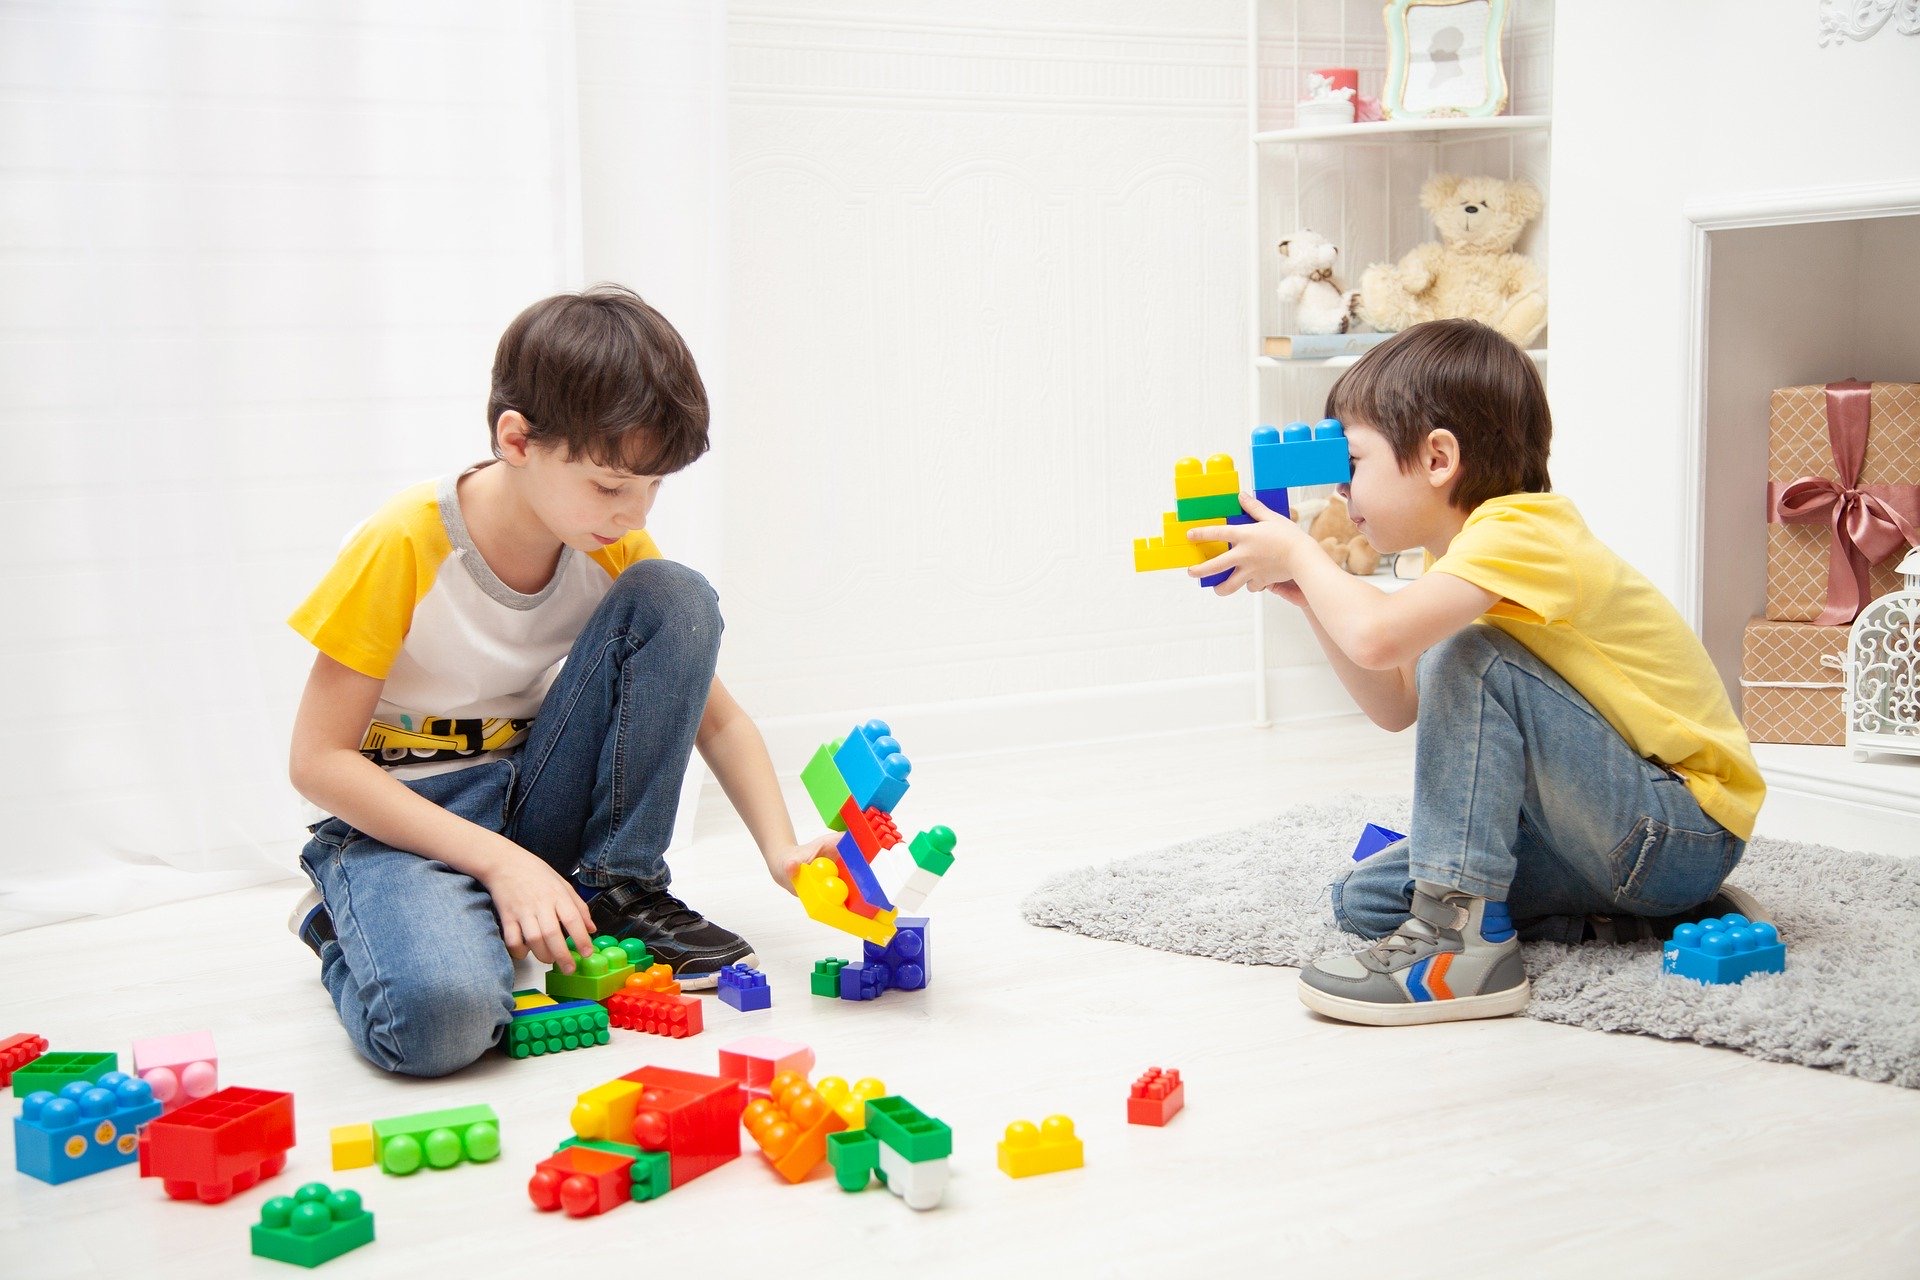 Two boys playing with plastic bricks in a white room.